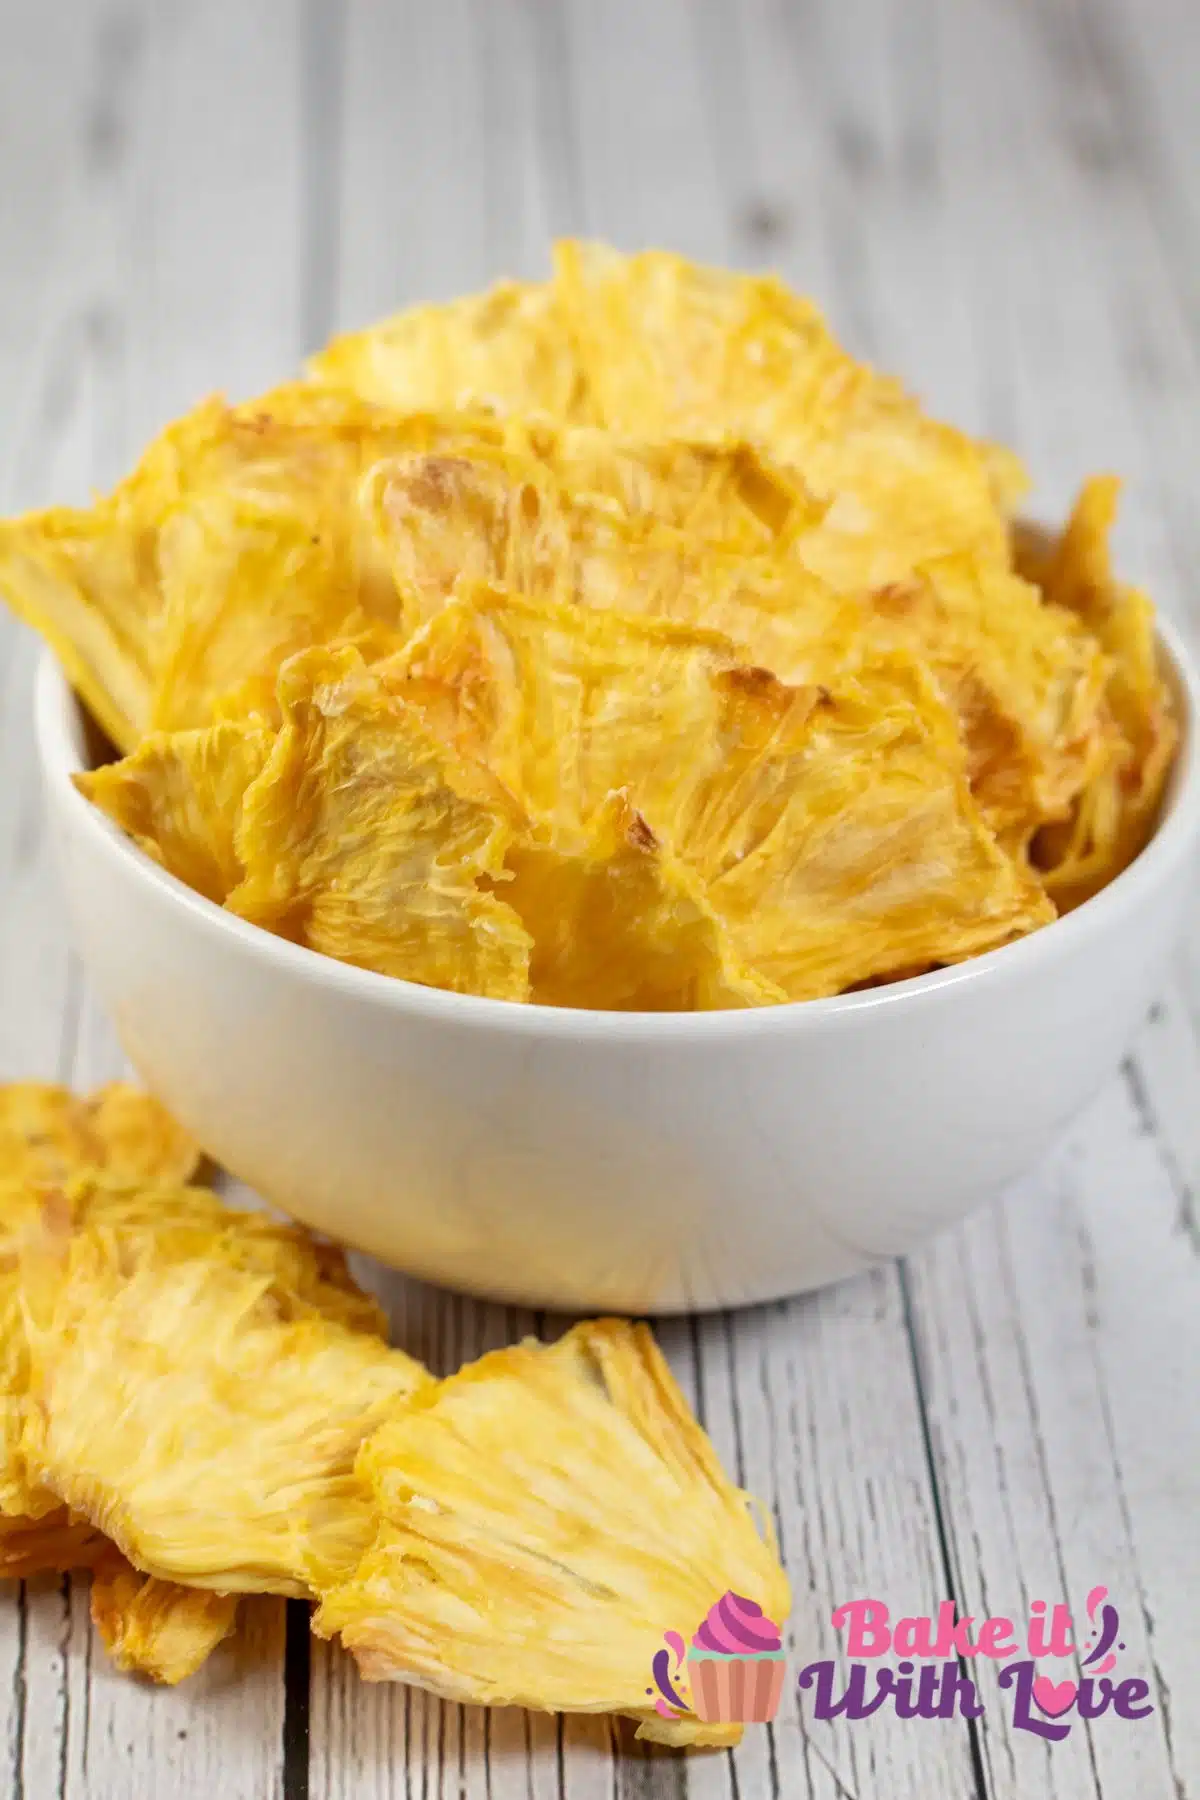 Tall image showing dehydrated pineapple chips.